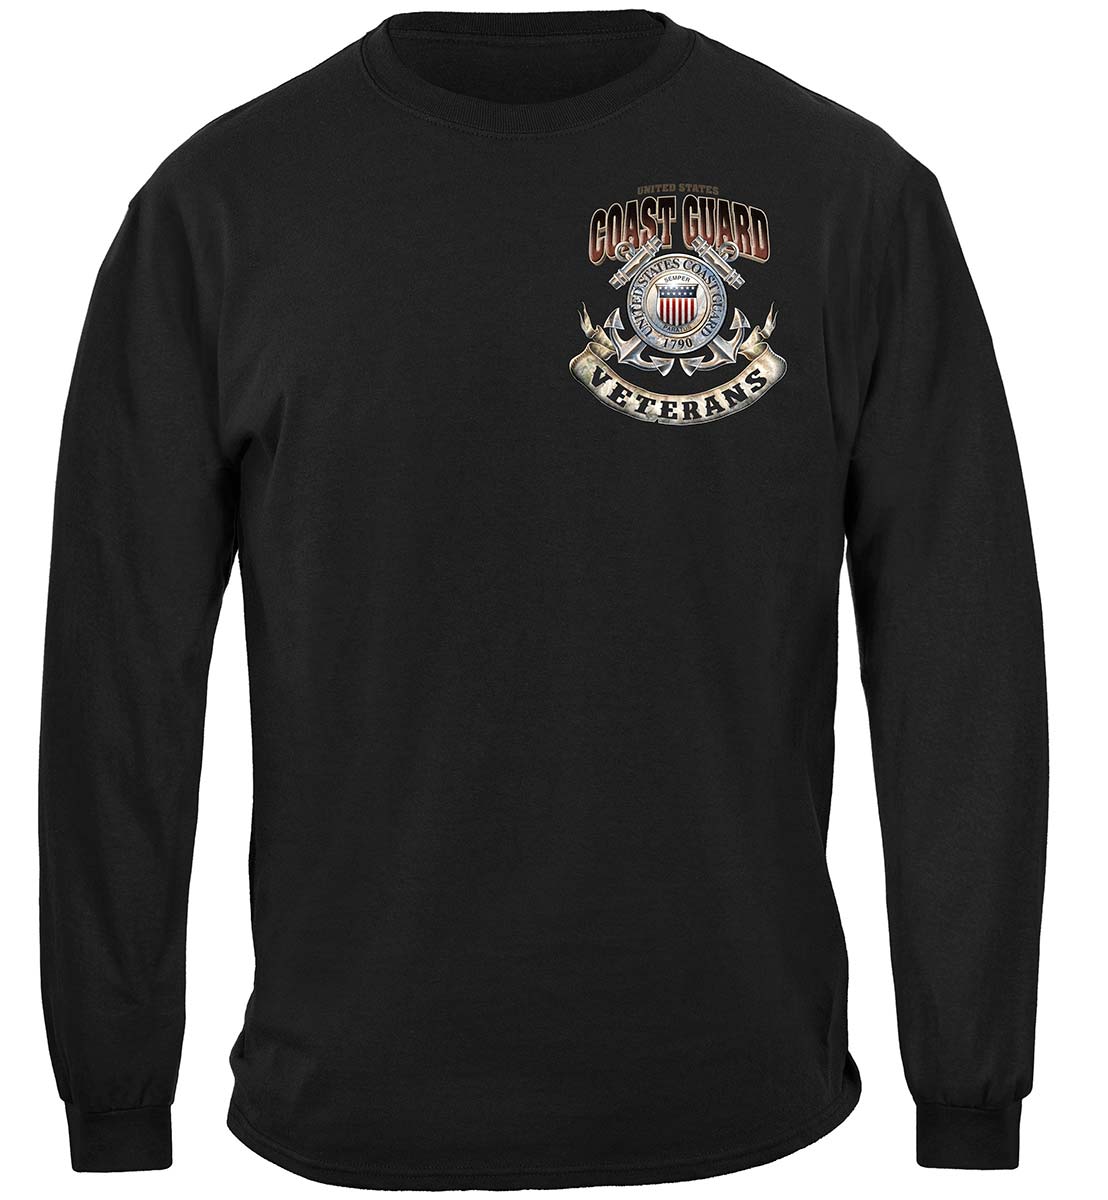 Coast Guard Proud To Have Served Premium T-Shirt